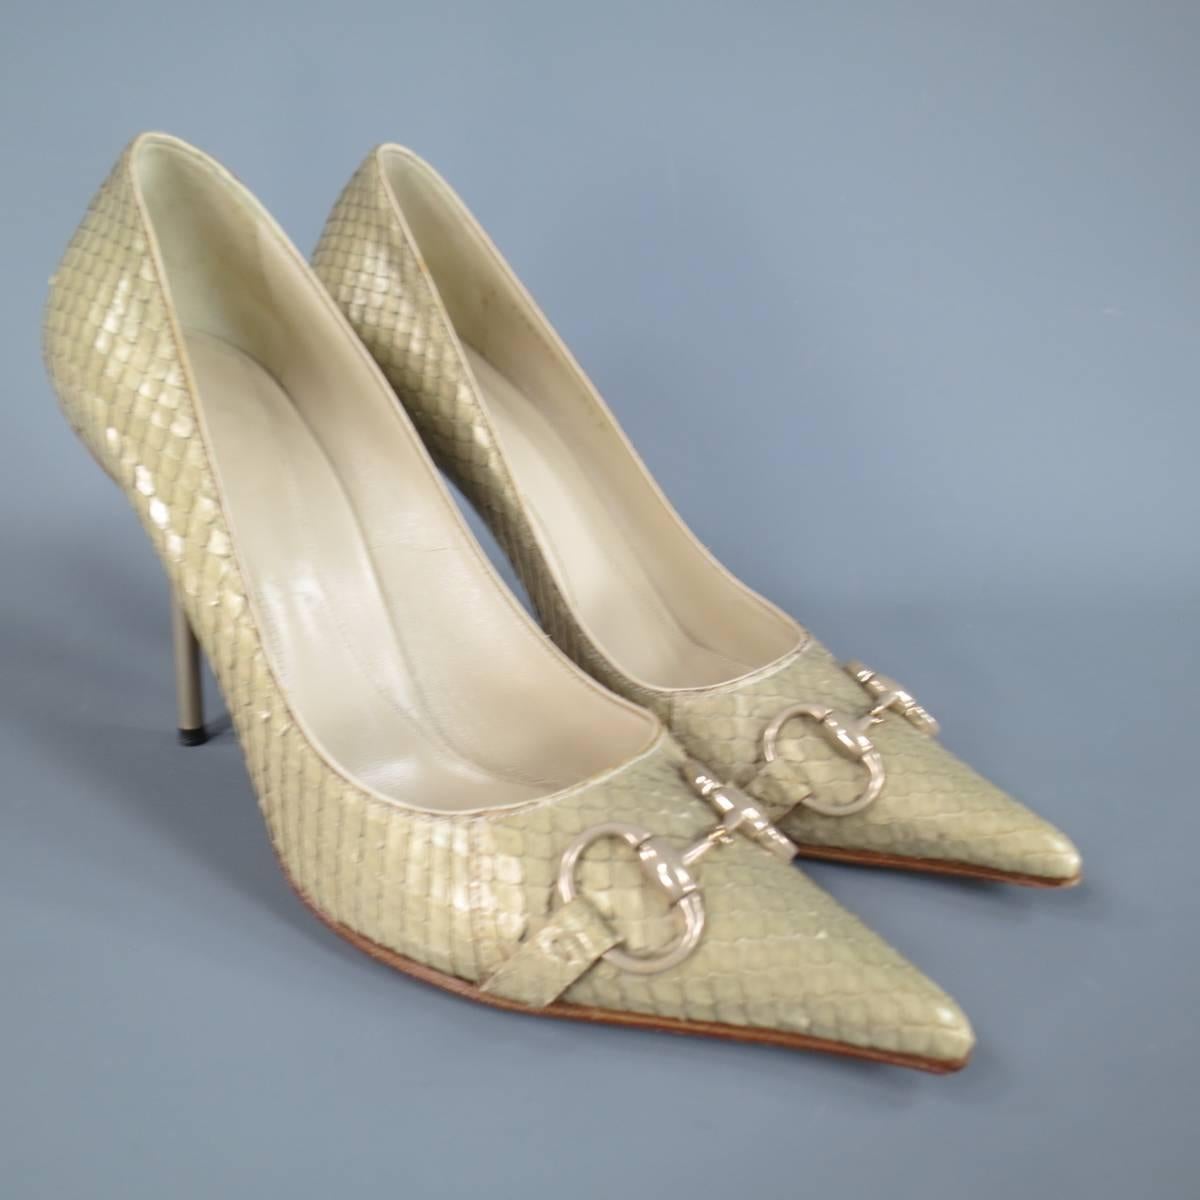 These fabulous GUCCI pumps come in a light muted minty beige snakeskin leather and feature a pointed toe with silver tone horsebit detail and a metal spike heel. Made in Italy.
Retails at $880.00.

Excellent Pre-Owned Condition.
Marked: US 9.5